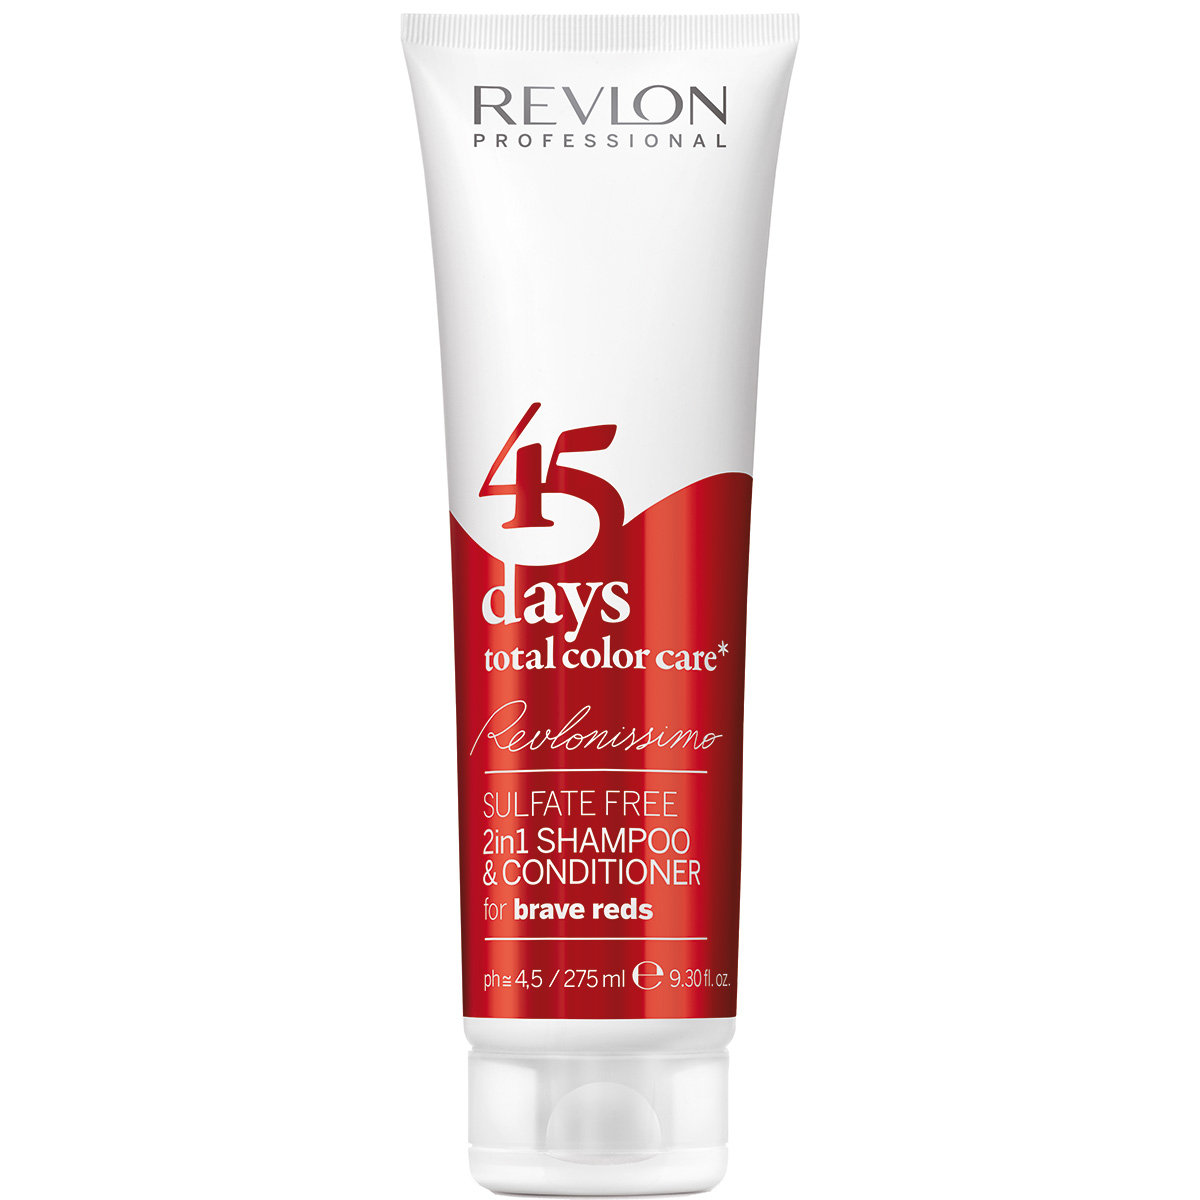 45 Days Total Color Care for Brave Reds, 275 ml Revlon Professional Schampo